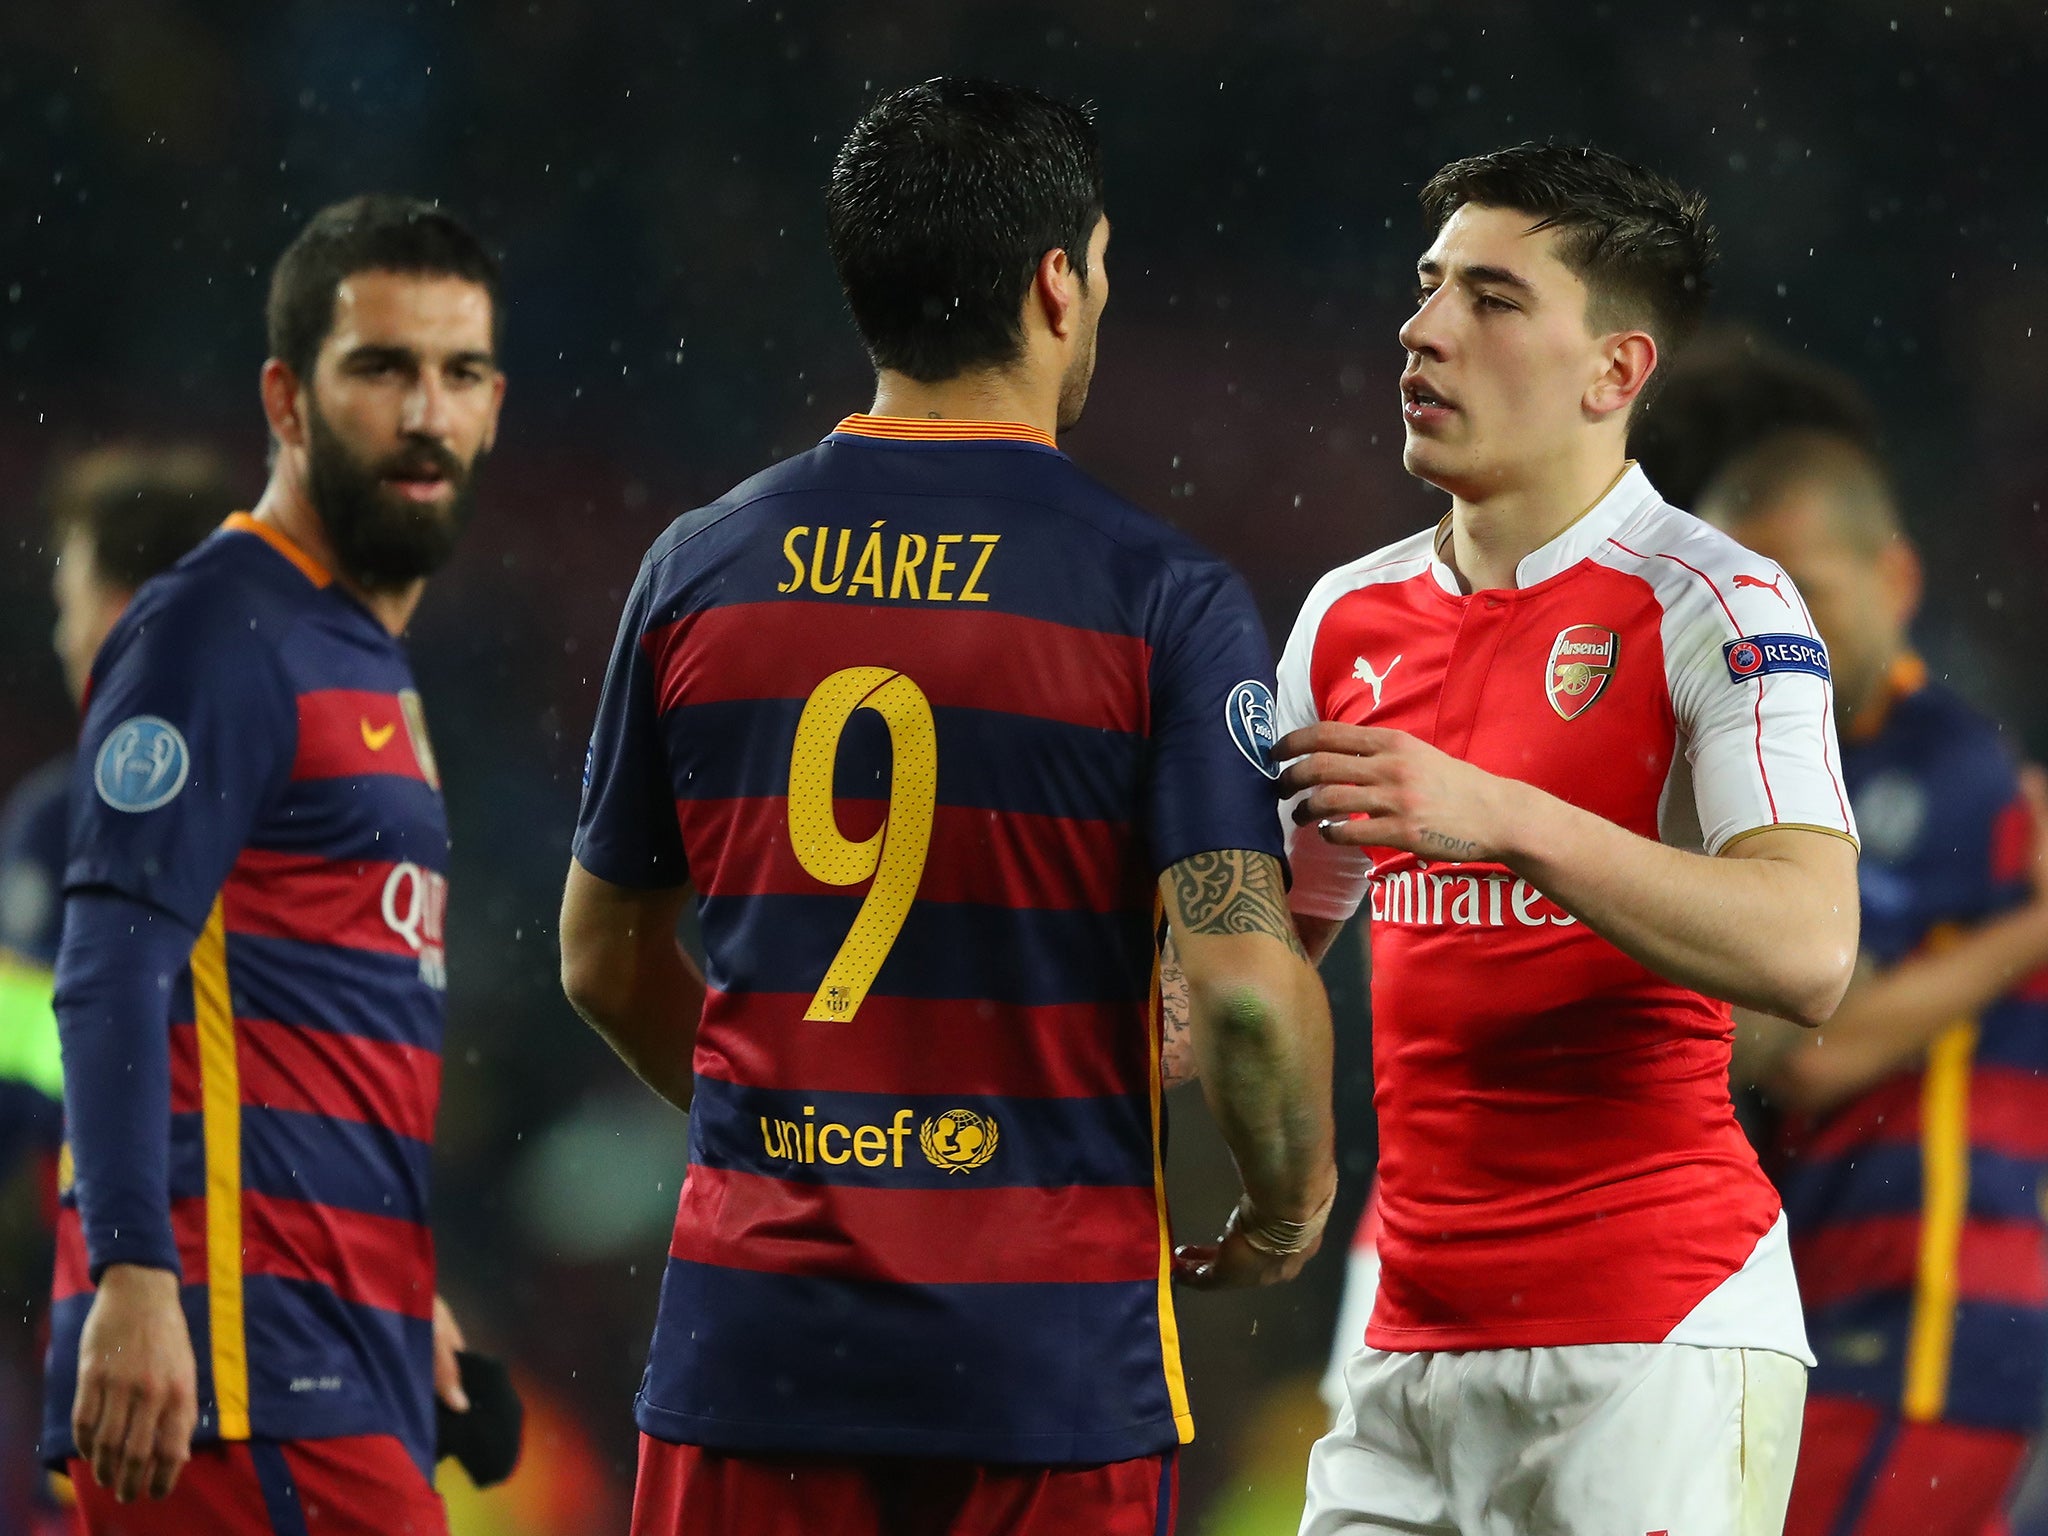 Hector Bellerin, Salary, Wife, Family, Barcelona, and so